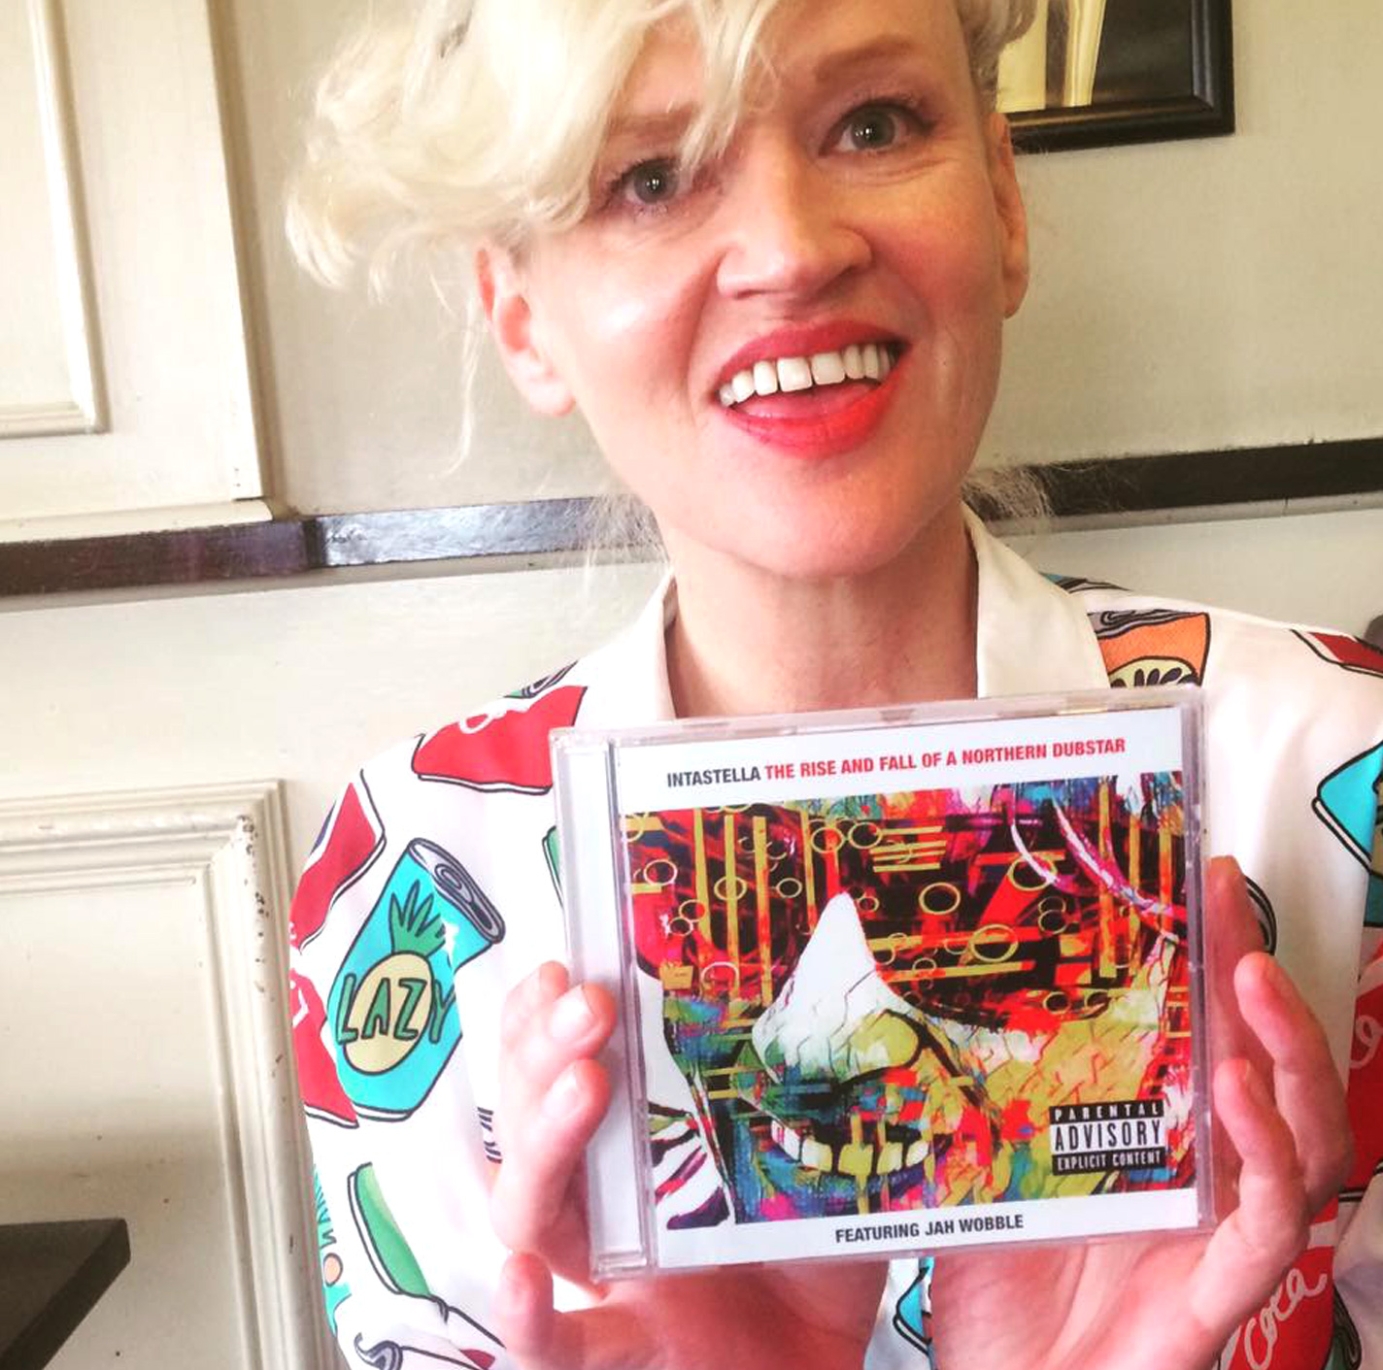 Stella Grundy holding copy of The Rise and fall of a northern Dubstar